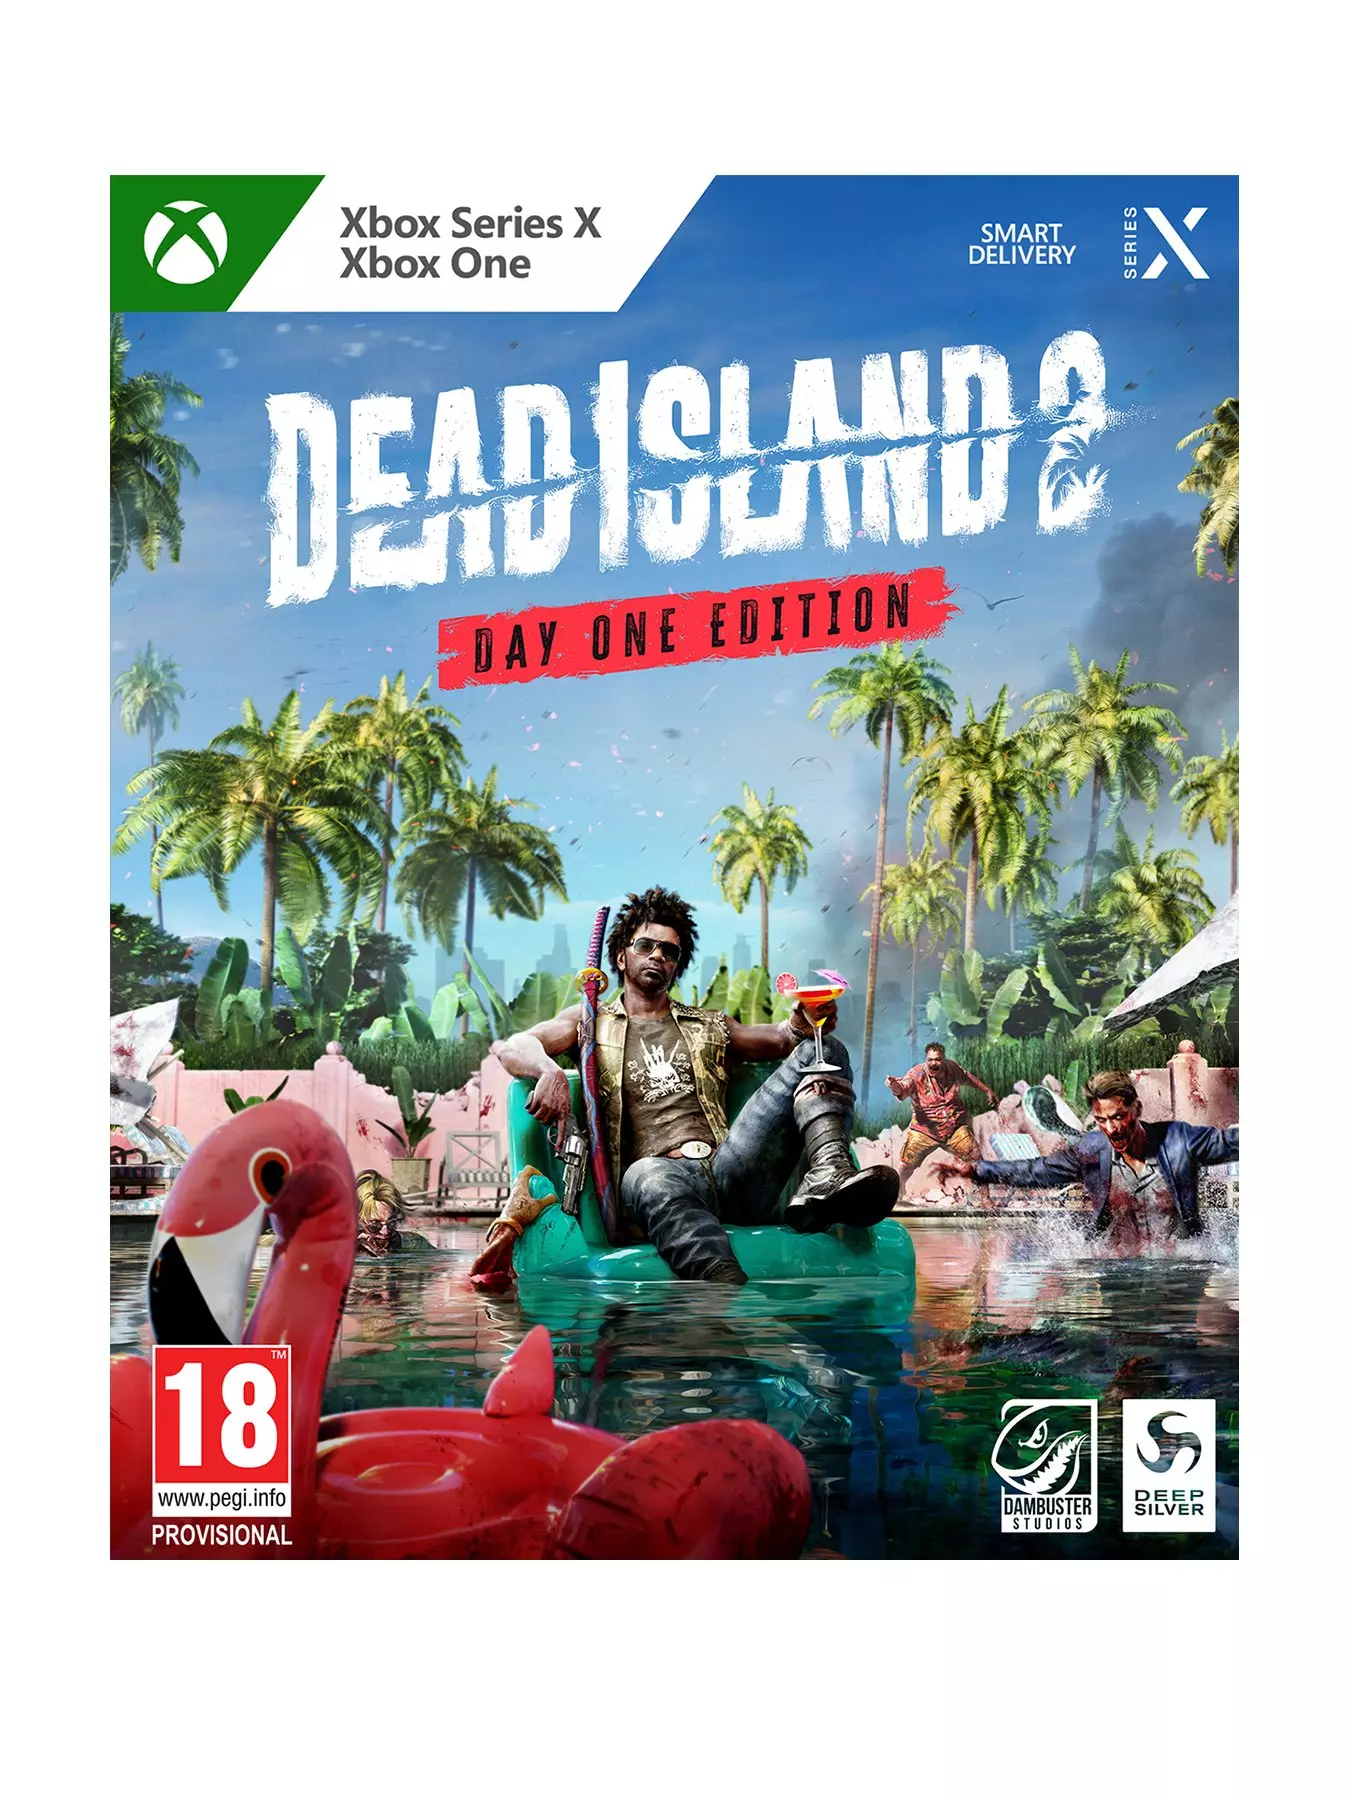 Dead Island 2 Hits Shelves February 3, 2023 on PS4 & PS5, dead island 2  gameplay 